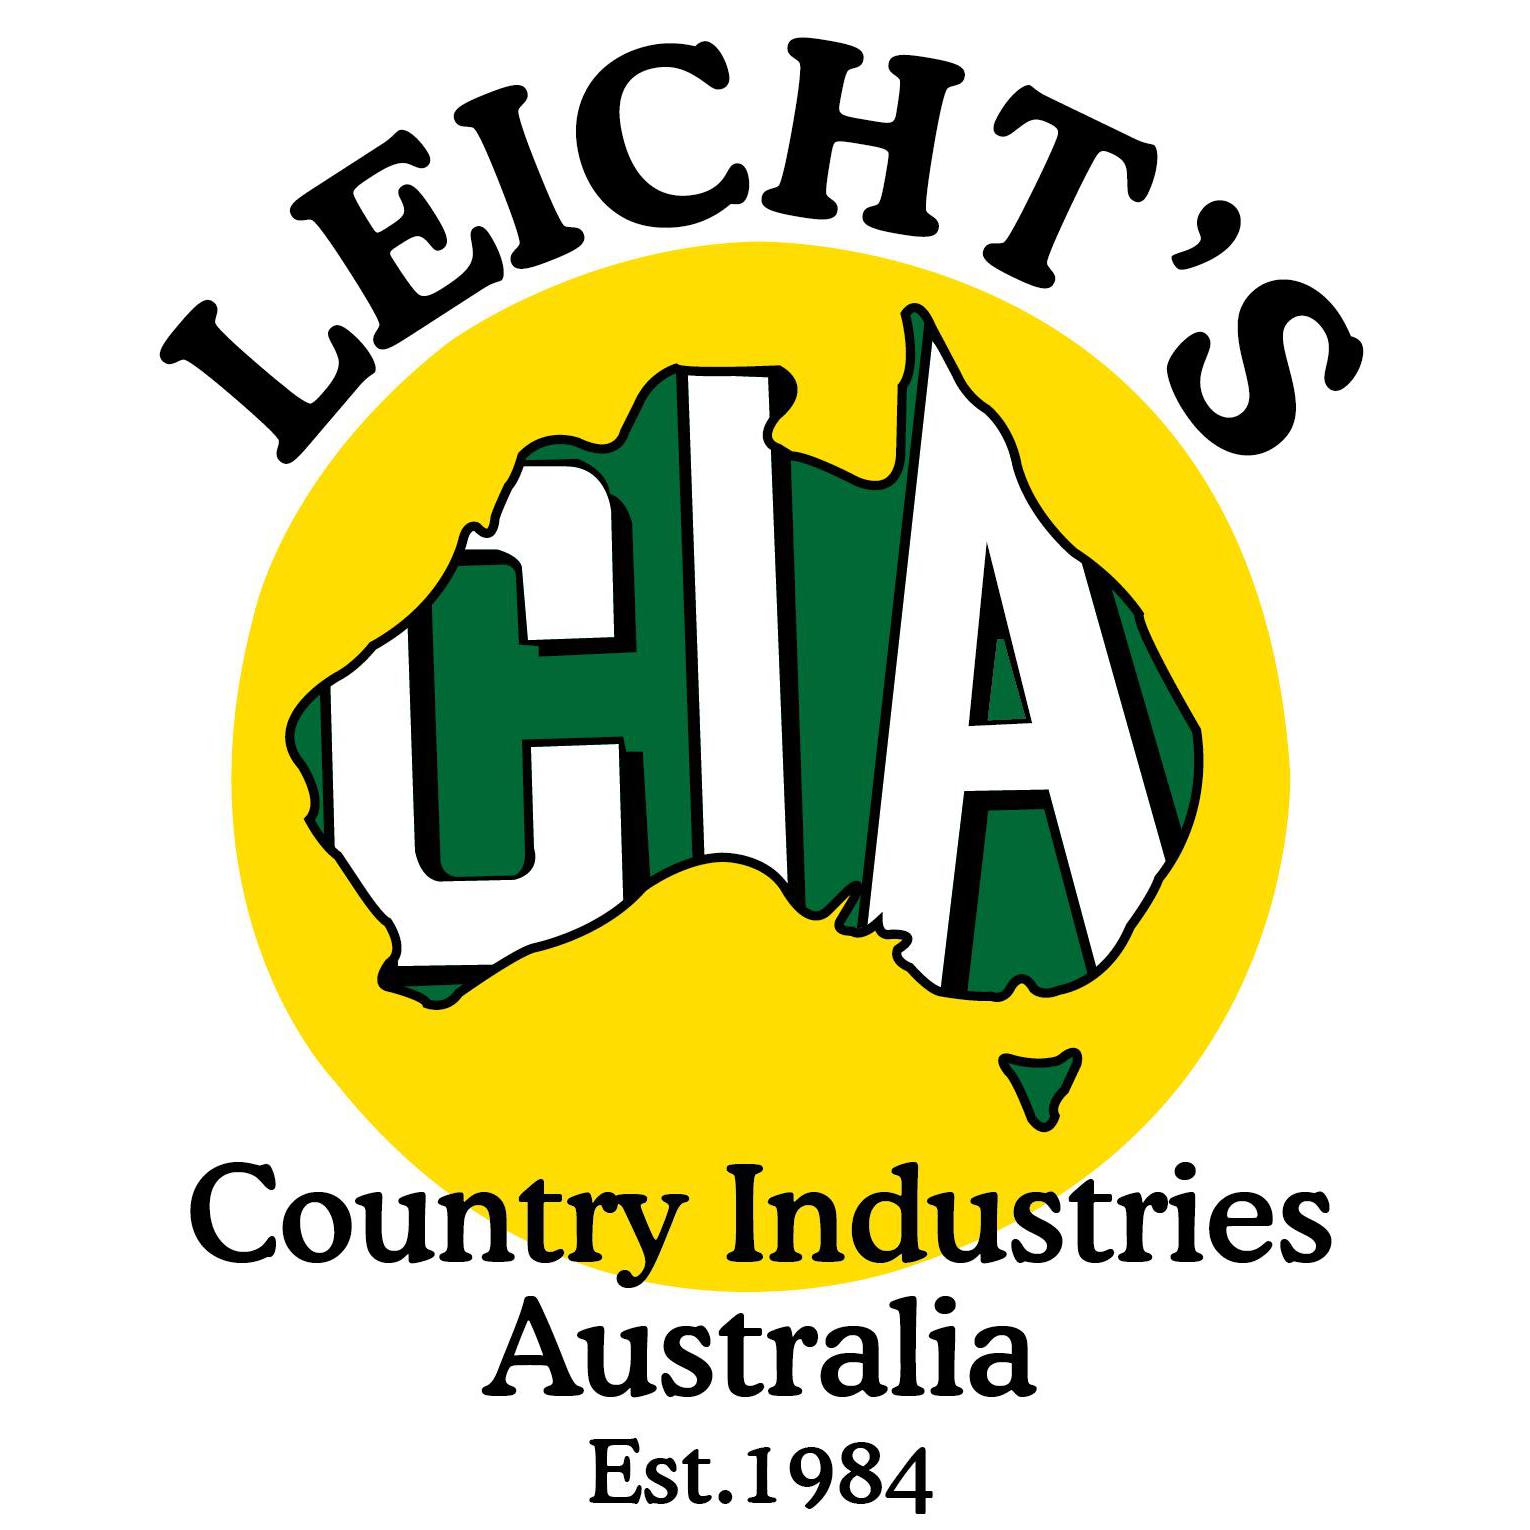 Leichts Country Industries Australia - Goombungee, QLD 4354 - (07) 4696 5200 | ShowMeLocal.com